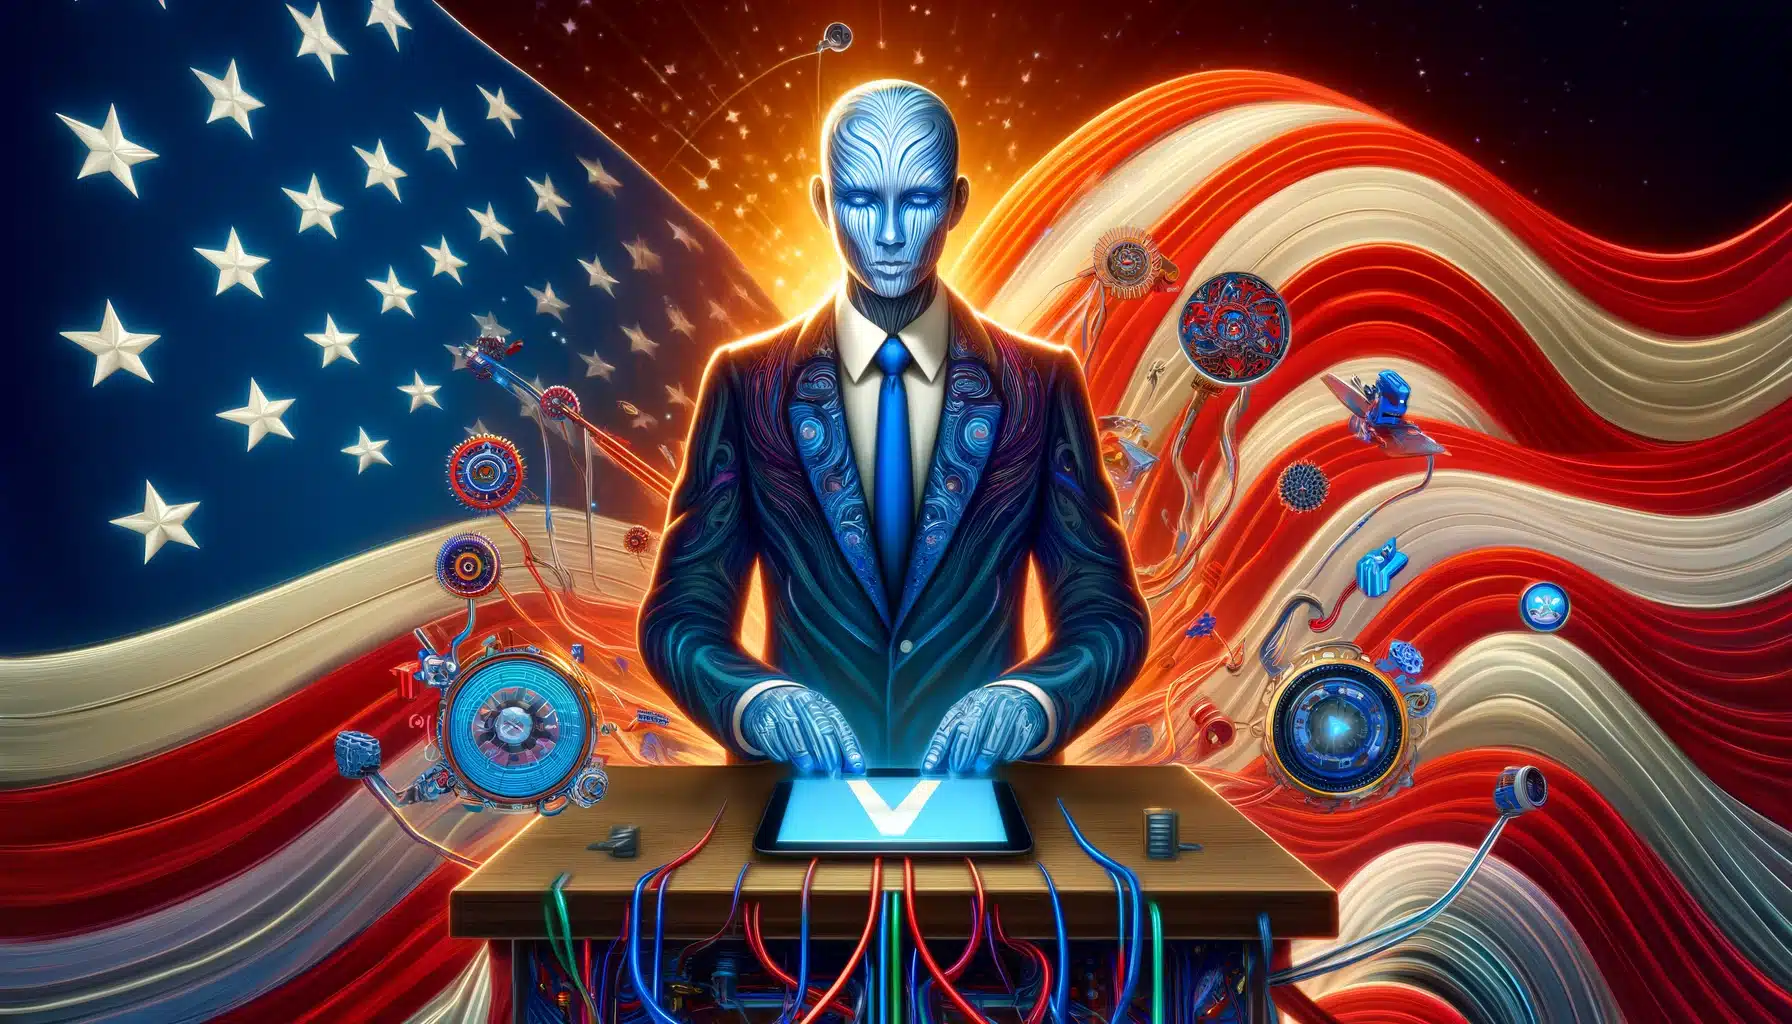 A digital illustration showcasing the fusion of AI in politics, centered around a humanoid figure with blue skin in a formal suit, representing governance. The figure stands amidst a dynamic collage of the American flag's elements and AI technology motifs. In the foreground, various AI-powered voting technologies such as a tablet, a touchscreen voting machine, and intricate tech components, all connected by wires, emphasize the complexity of modern voting systems. A prominent "Vote" sign on a podium underscores the theme, illustrating the significant impact of digital advancements on democratic processes